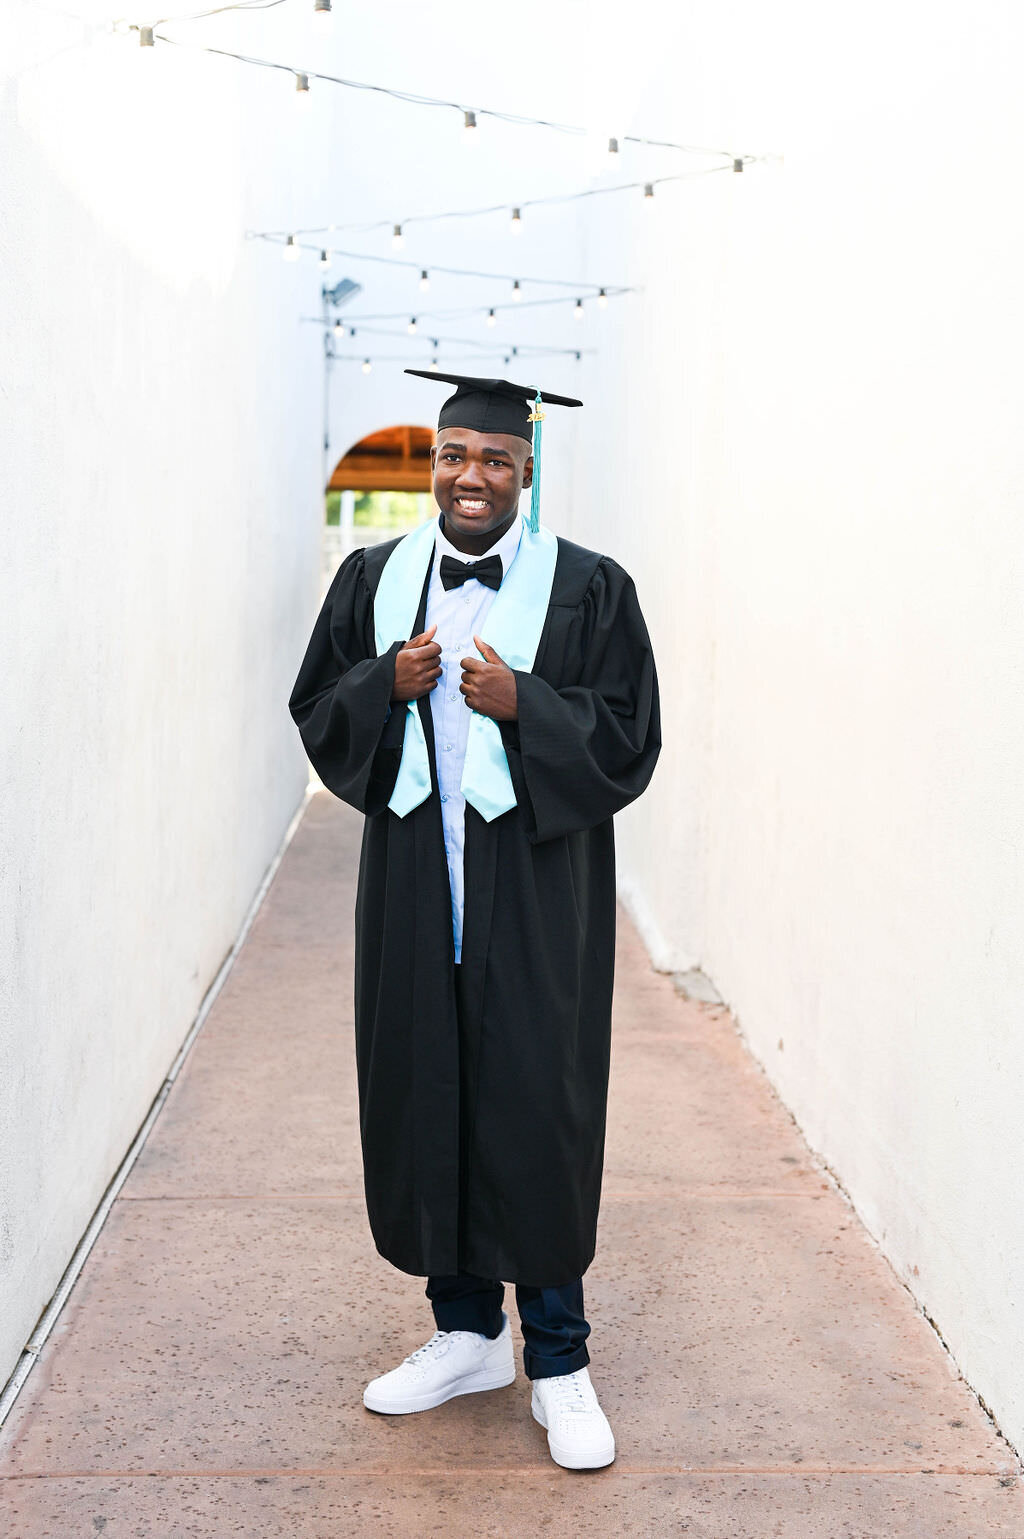 A boy in a graduation cap and gown smiling.